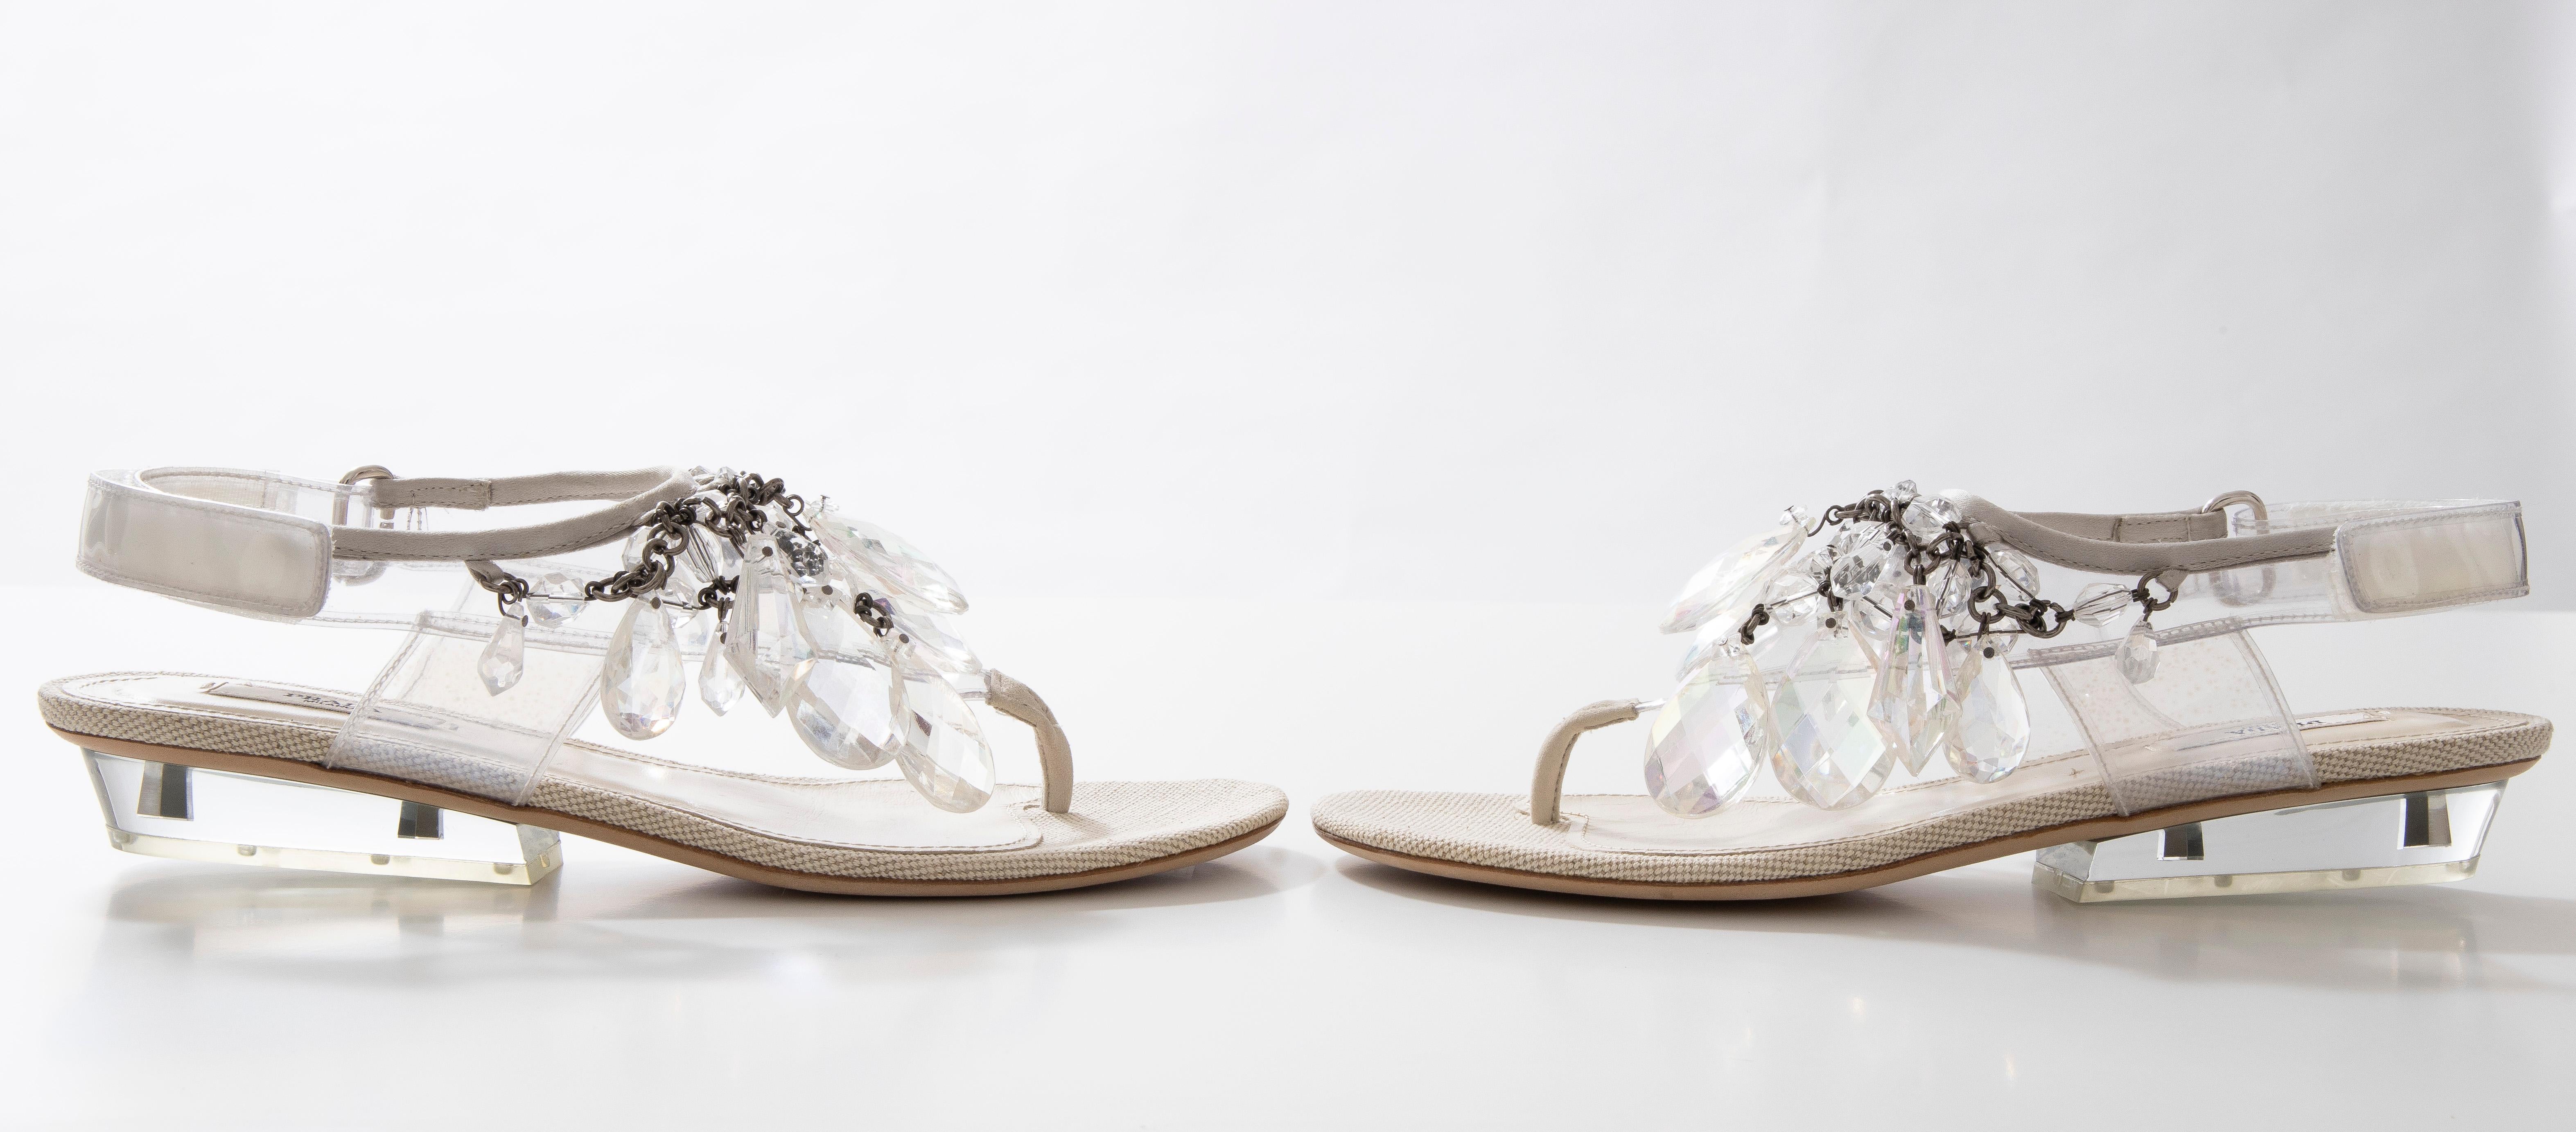 Prada Runway Clear PVC Lucite Faceted Crystal Thong Sandals, Spring 2010 6